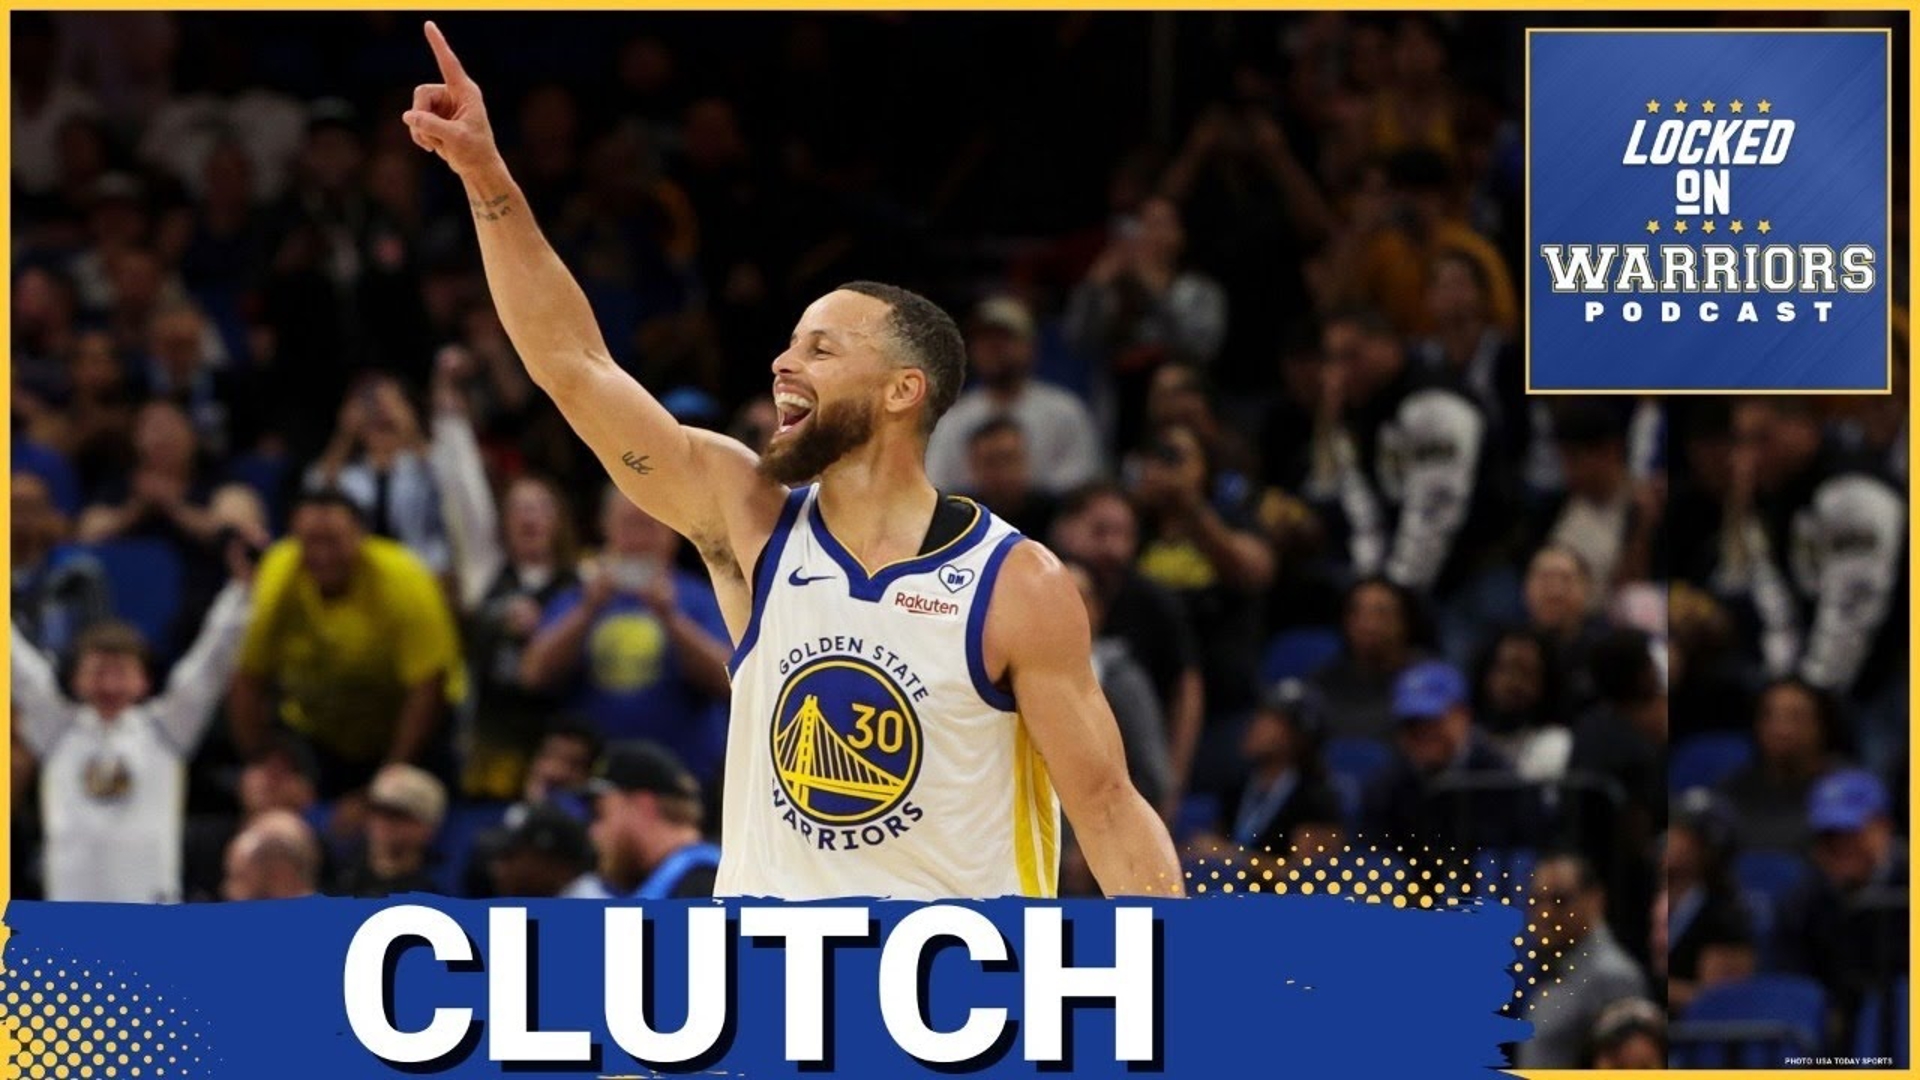 Stephen Curry Wins Clutch Player of the Year Award Plus Analyzing What